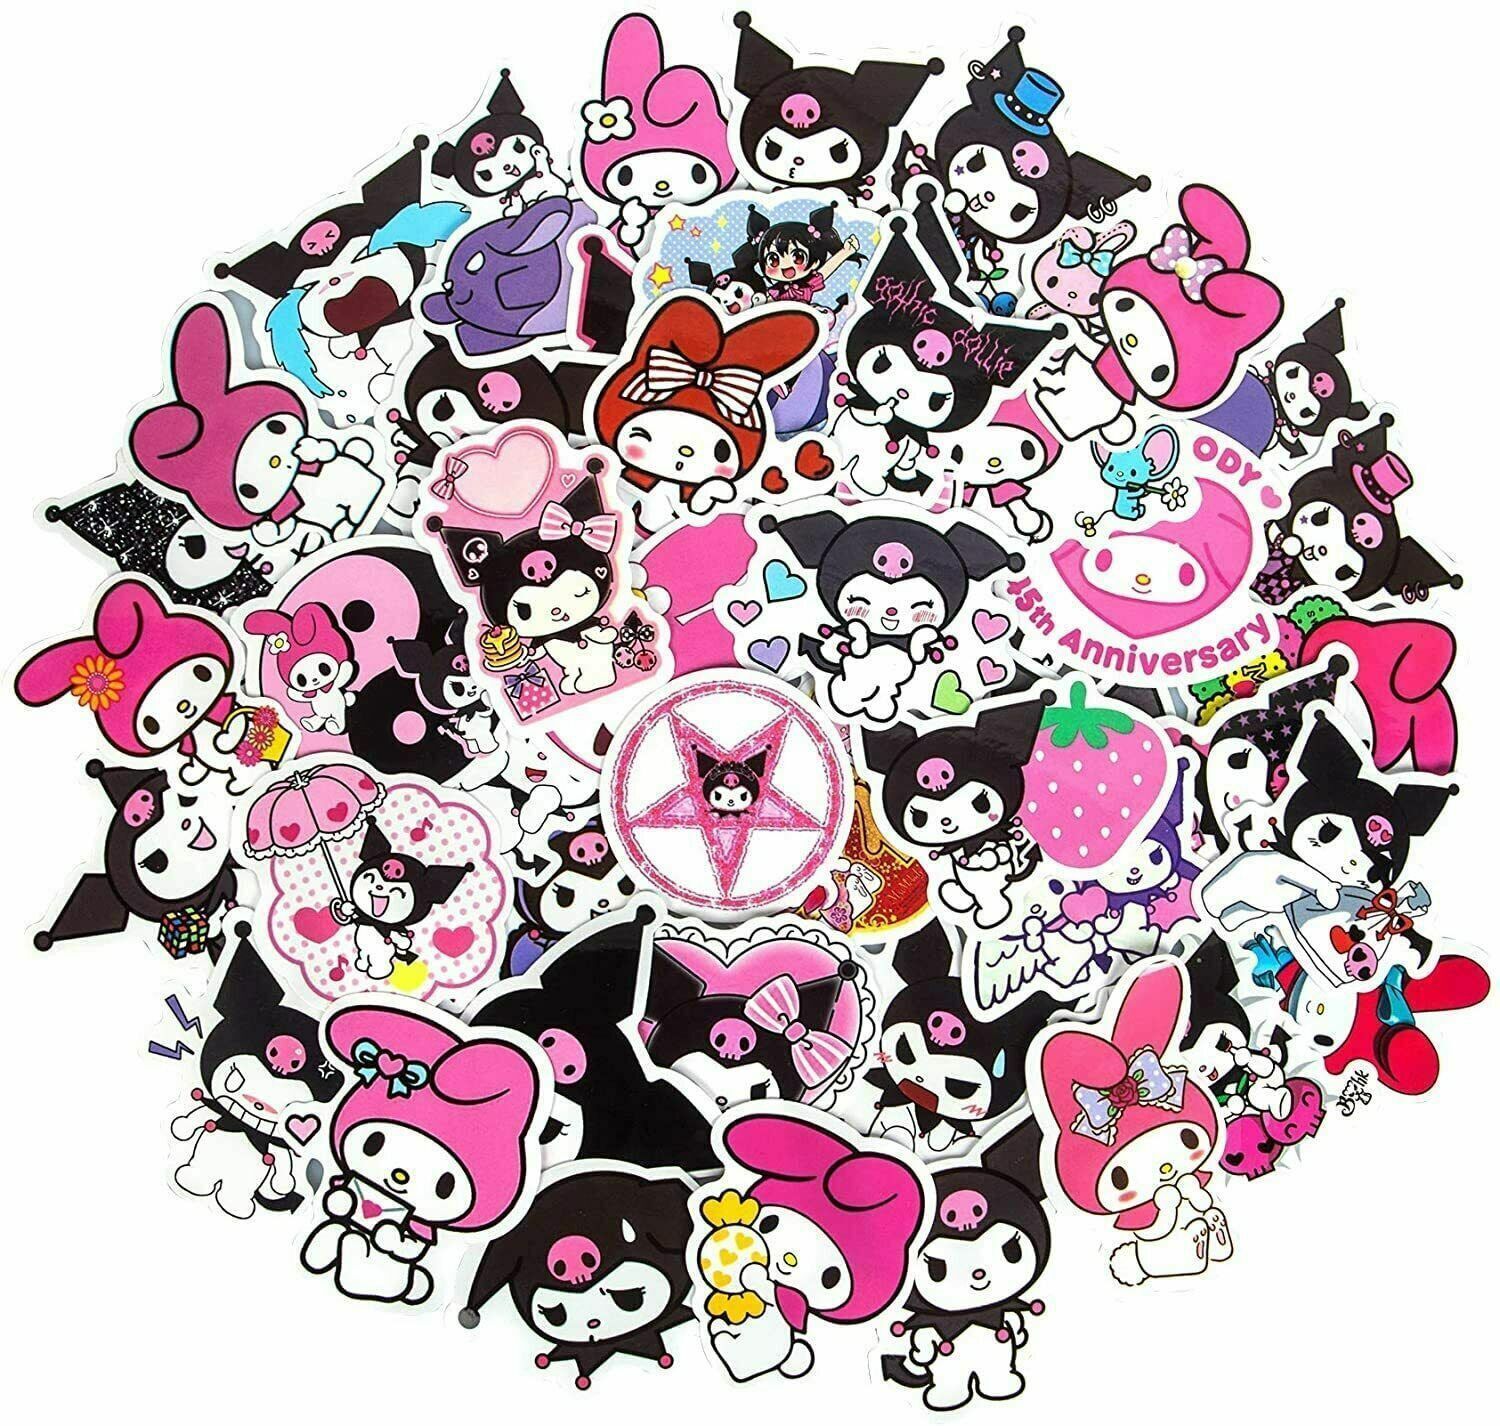 A circle of stickers with various characters - Kuromi